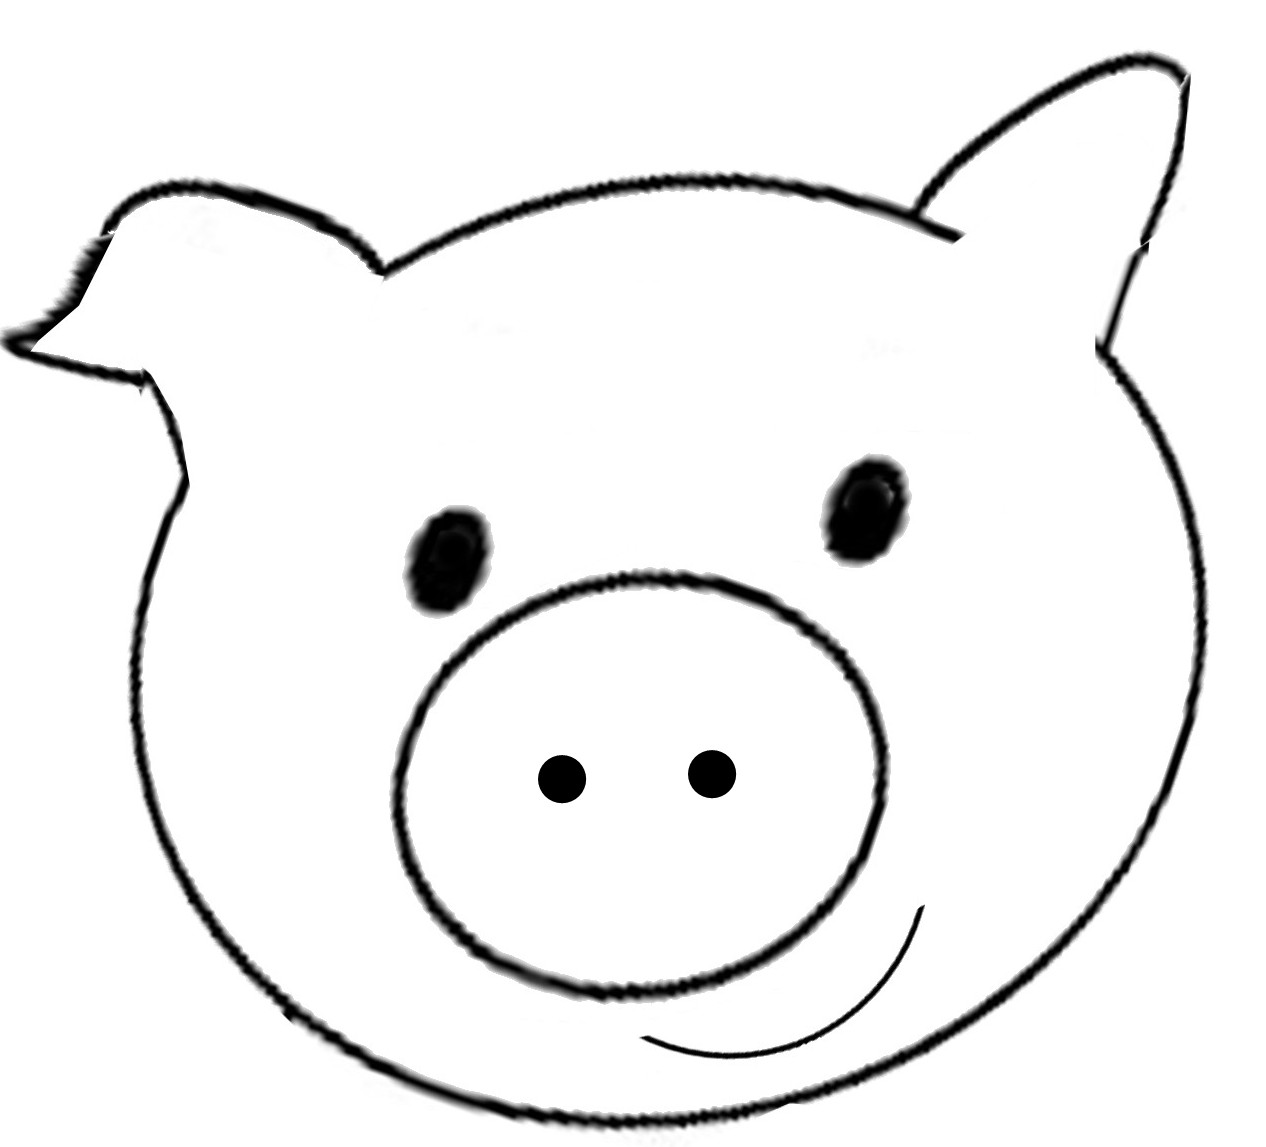 Best Photos of Pig Nose Template - Pig Ear Template Printable, Pig ...